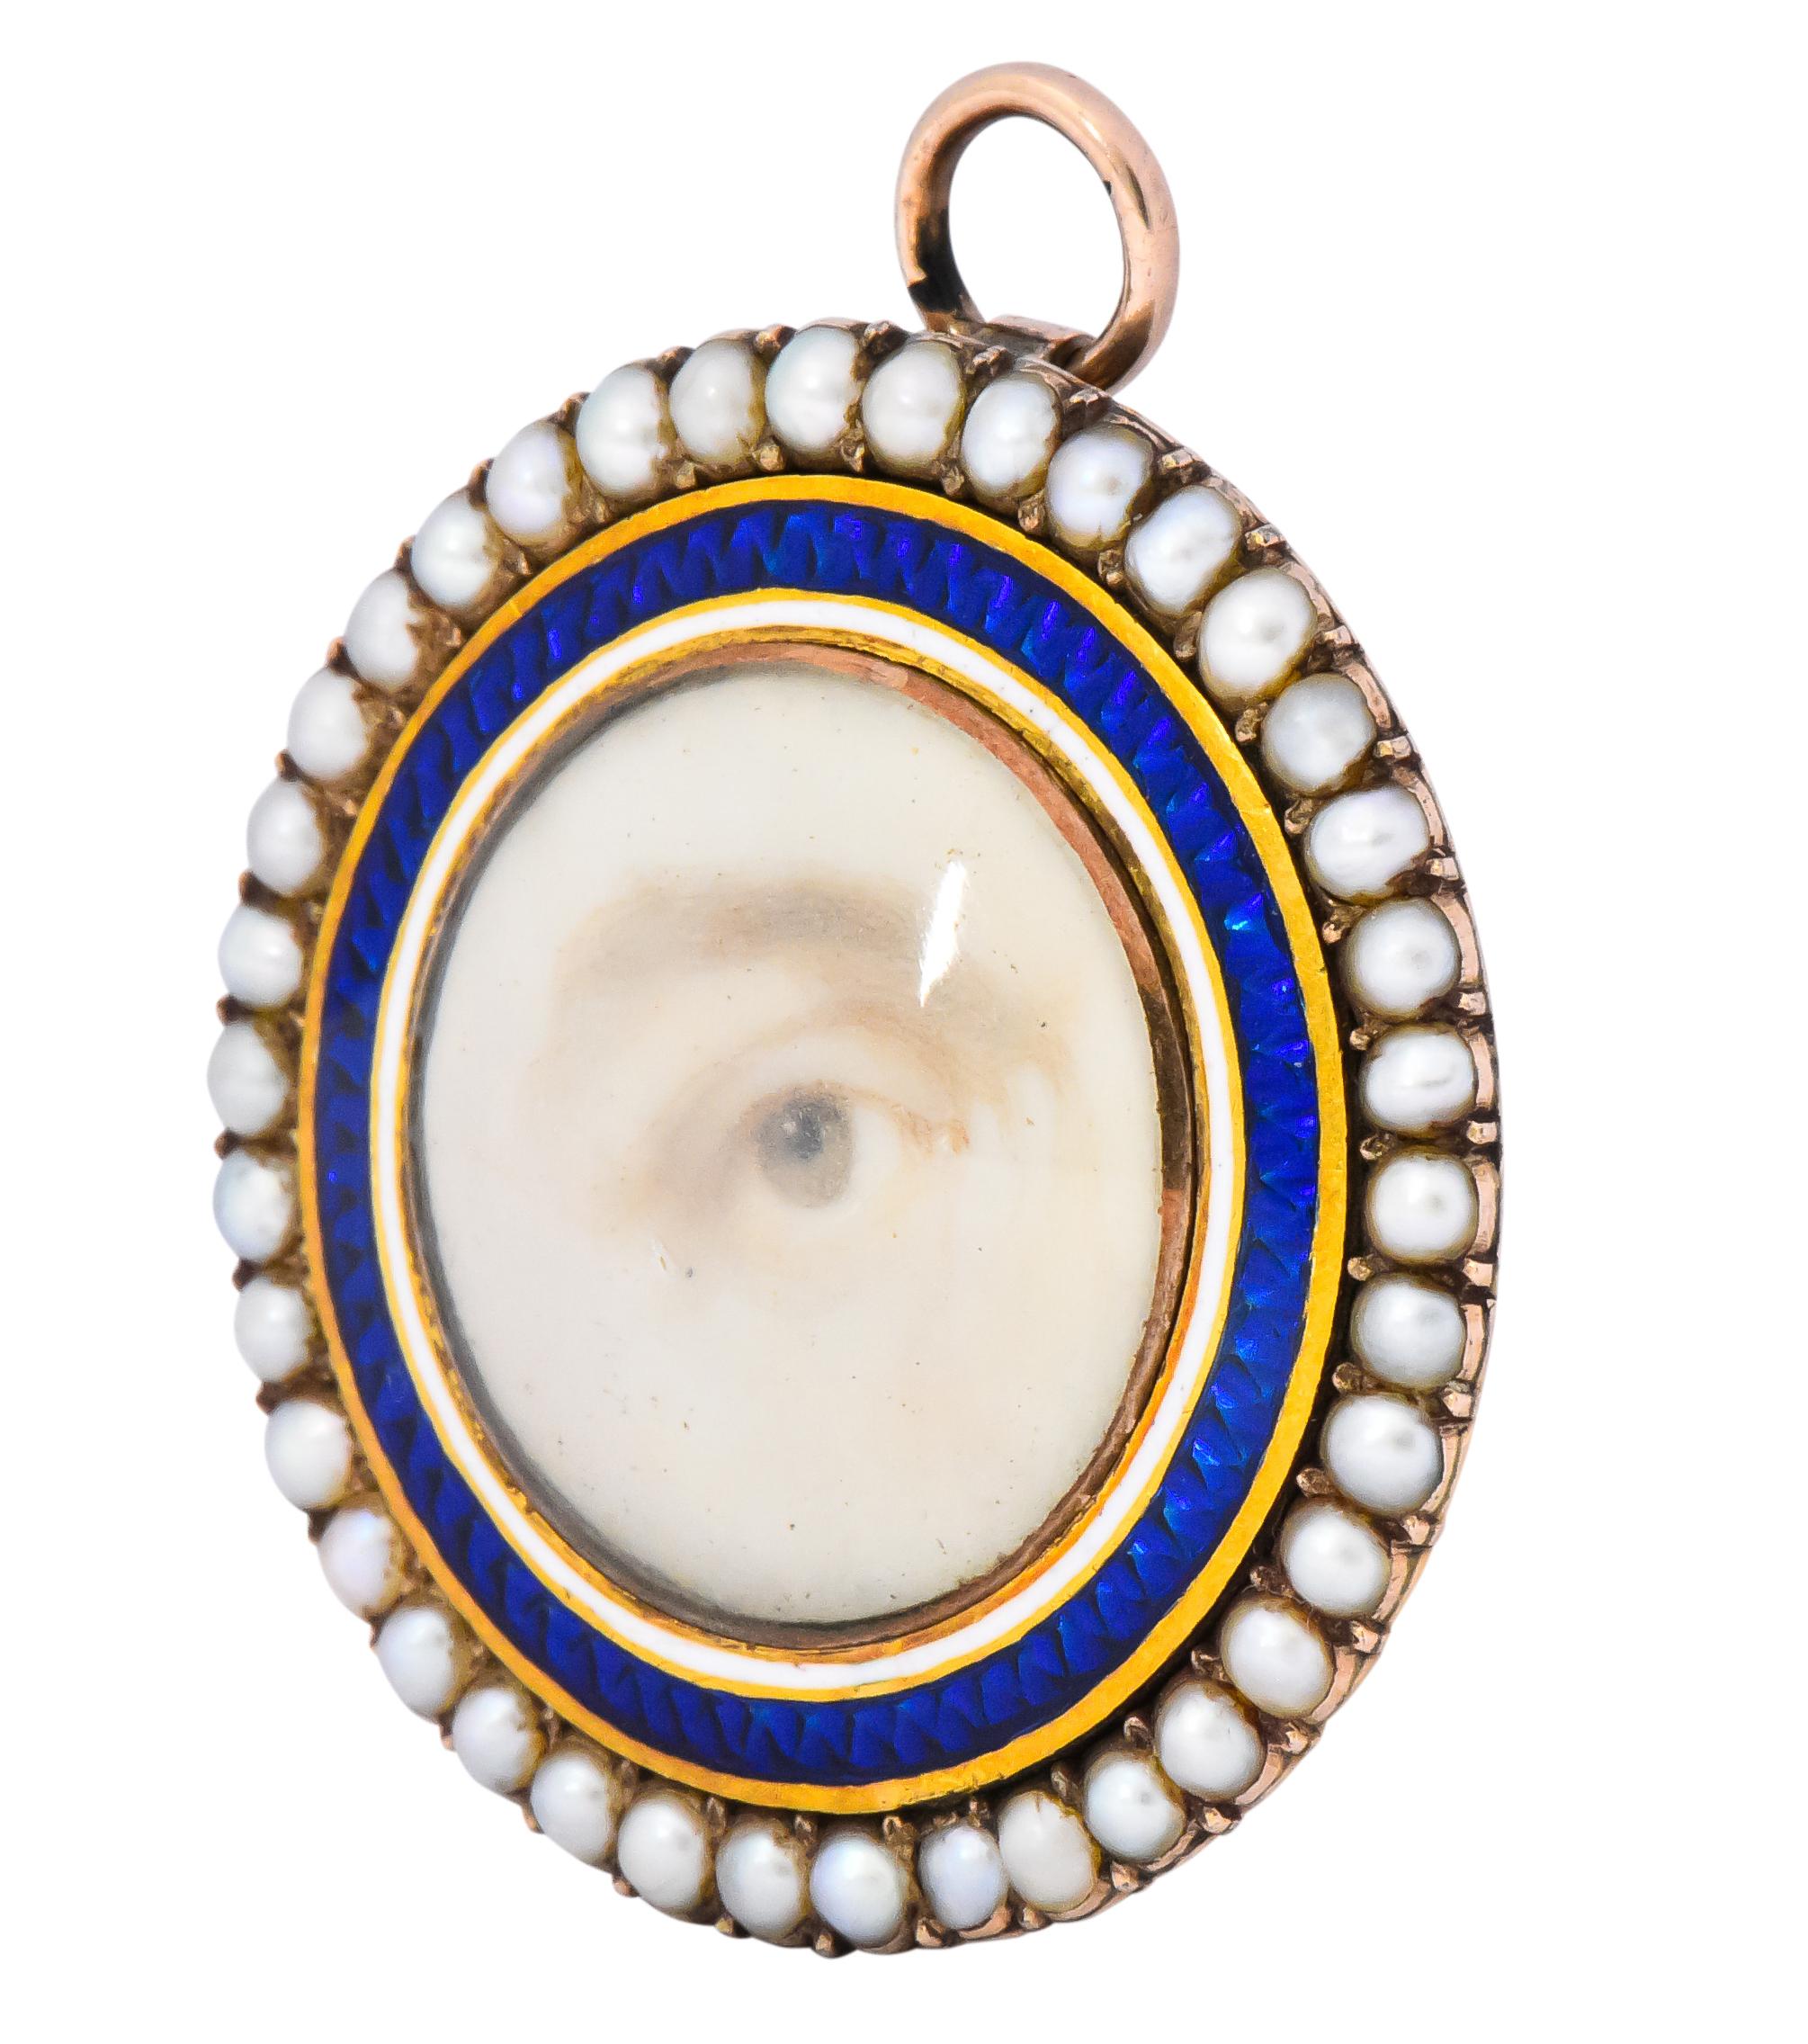 Featuring a diminutive hand-painted picture of an eye

With a white and bright royal blue surround 

Delicate seed pearl frame

With pin stem and fold-down bale 

12 karat or higher gold

Popular gift between lovers in the early to mid 19th century